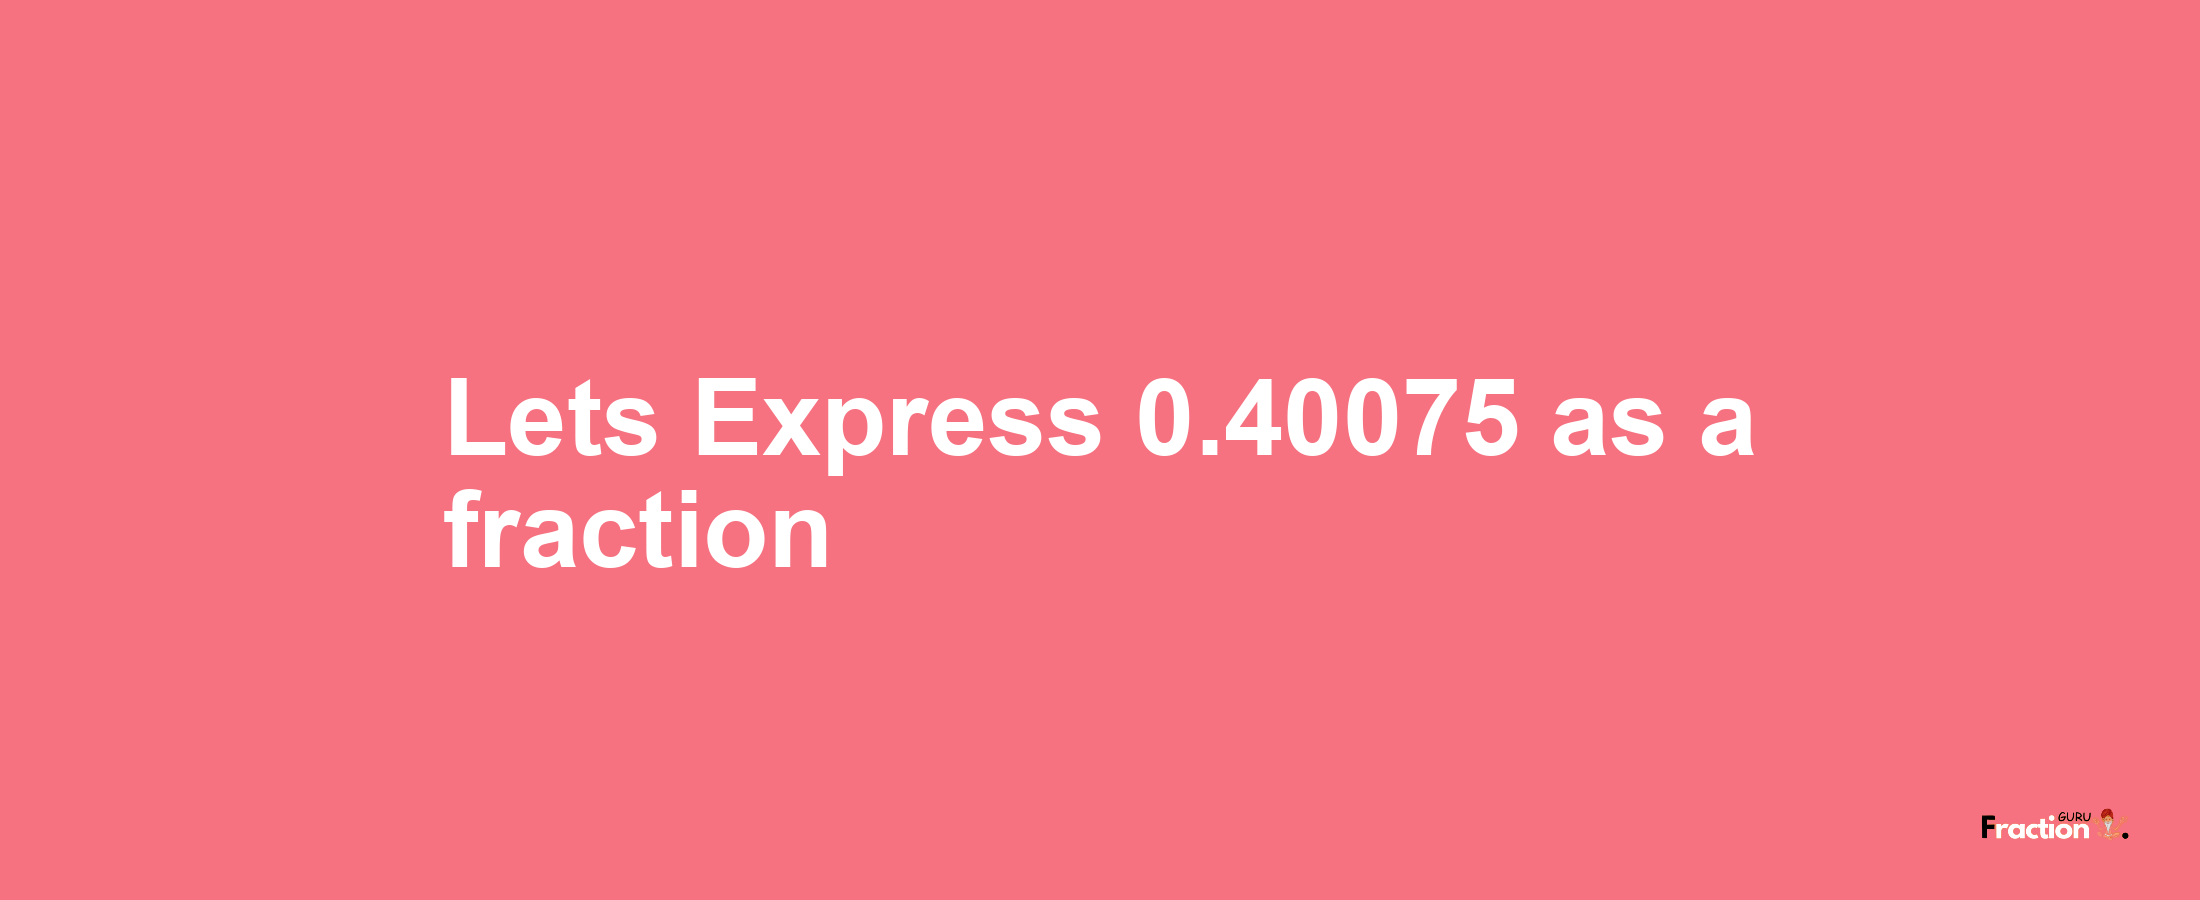 Lets Express 0.40075 as afraction